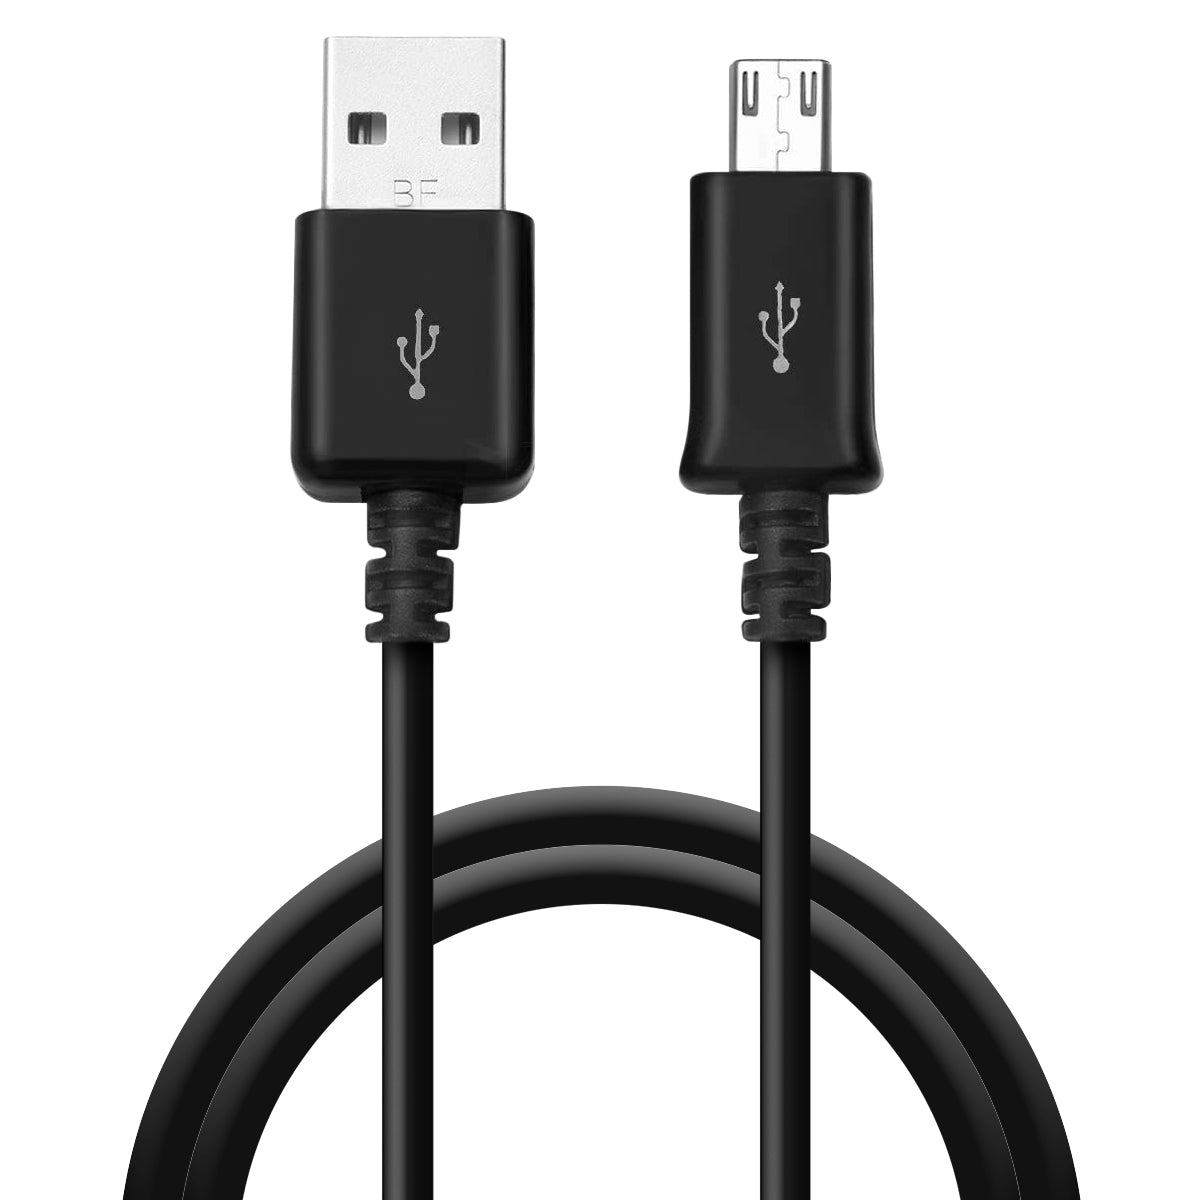 Charge Cable - 4FT Samsung OEM Micro USB to USB-A Black (Bulk) Cables